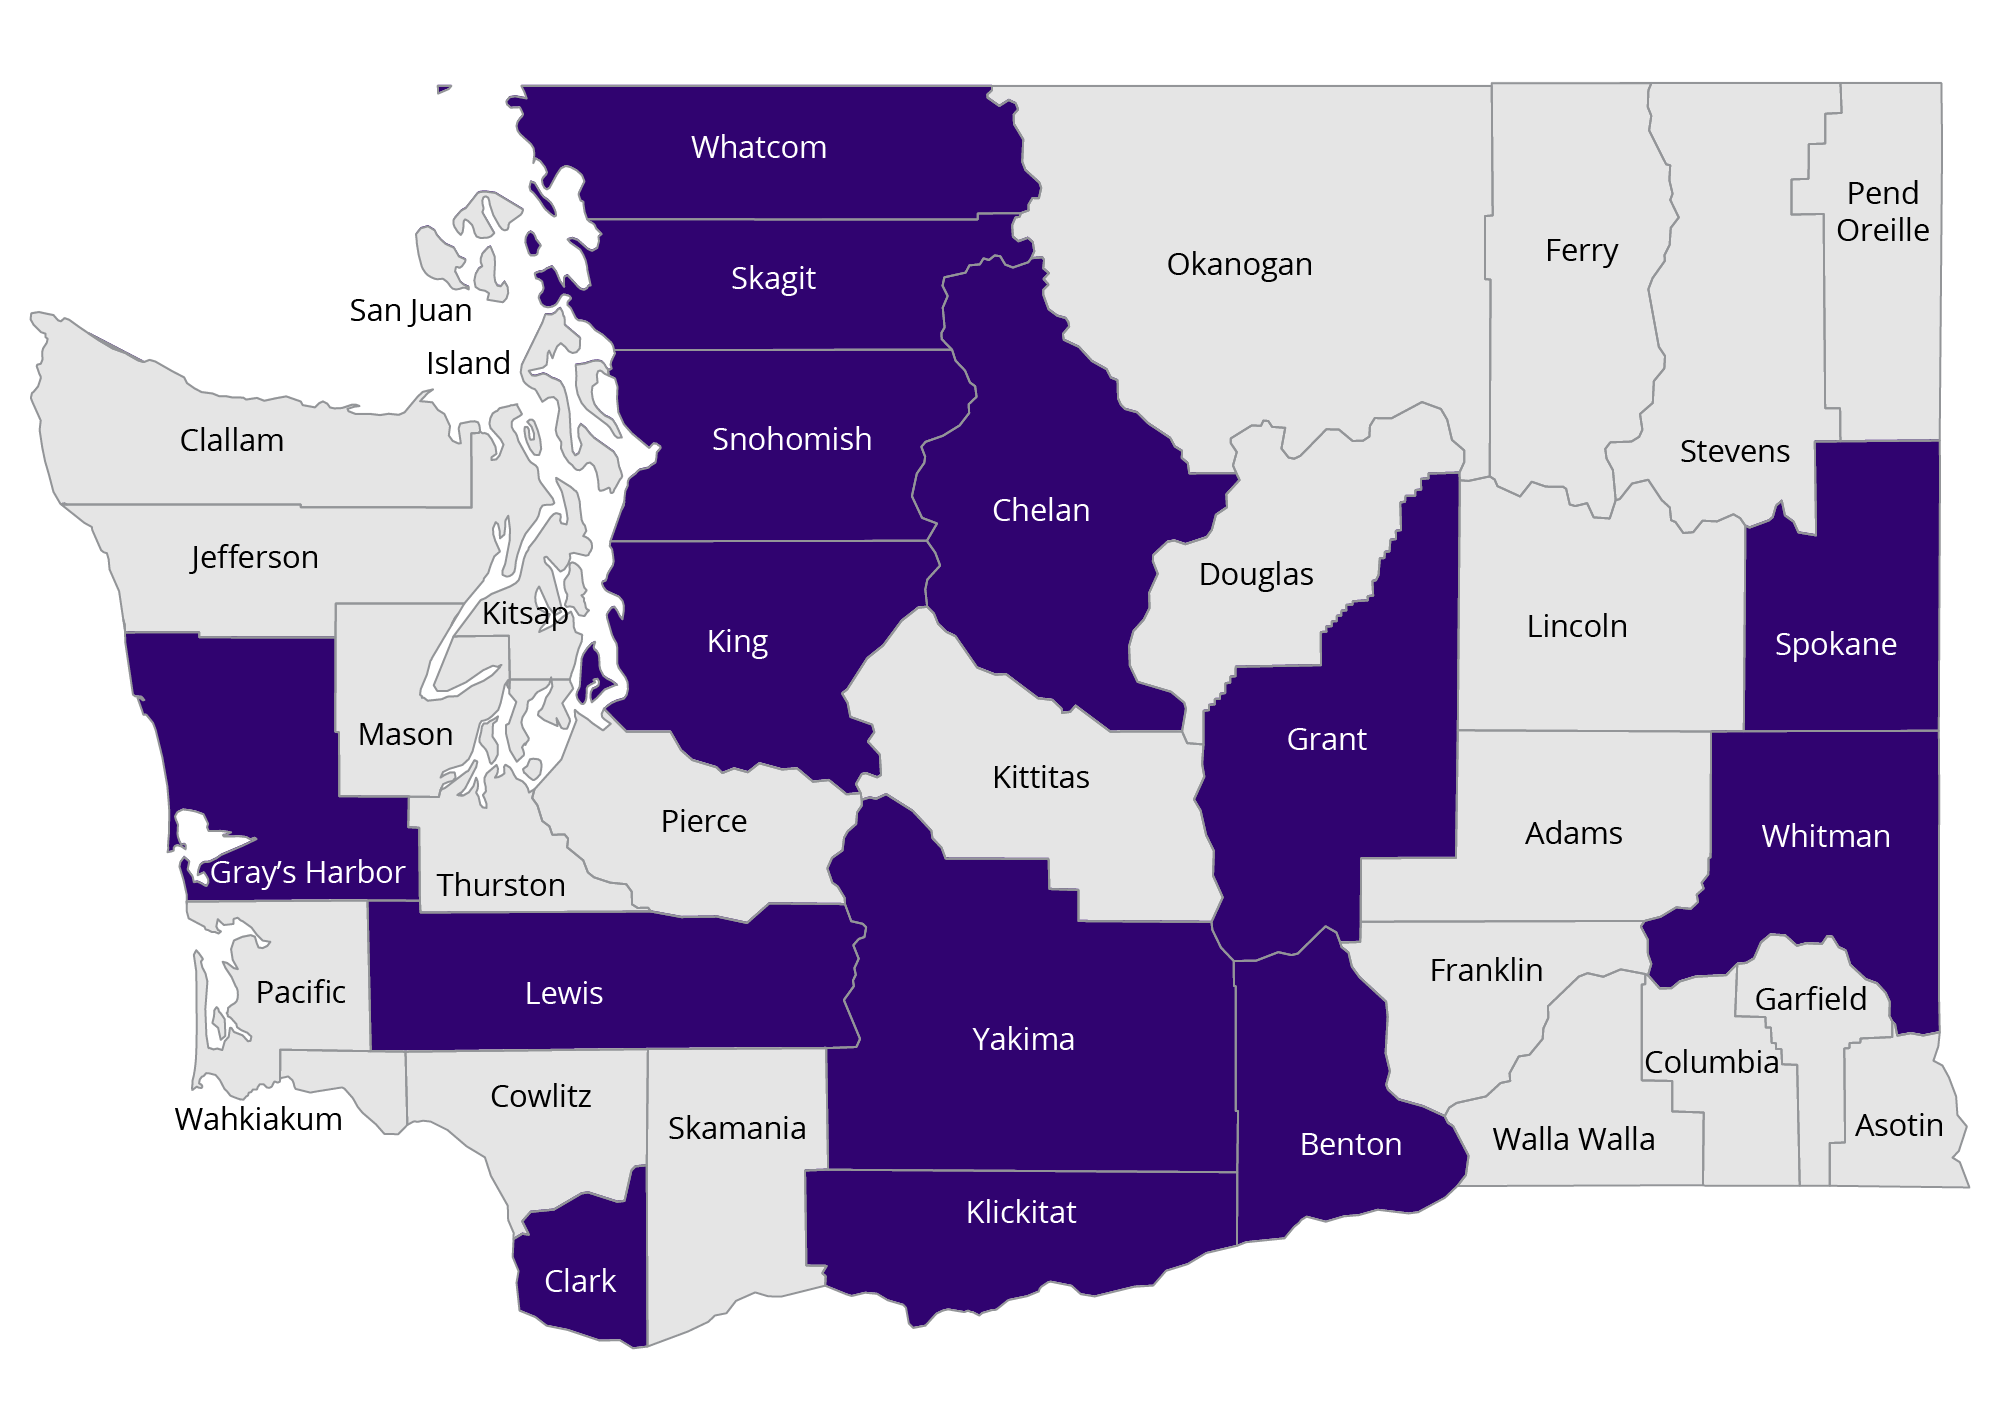 The Pacific Northwest Agricultural Safety and Health Center works in the following Washington counties: Benton, Chelan, Clark, Grant, Grays Harbor, King, Klickitat, Lewis, Skagit, Snohomish, Spokane, Whatcom, Whitman, and Yakima.